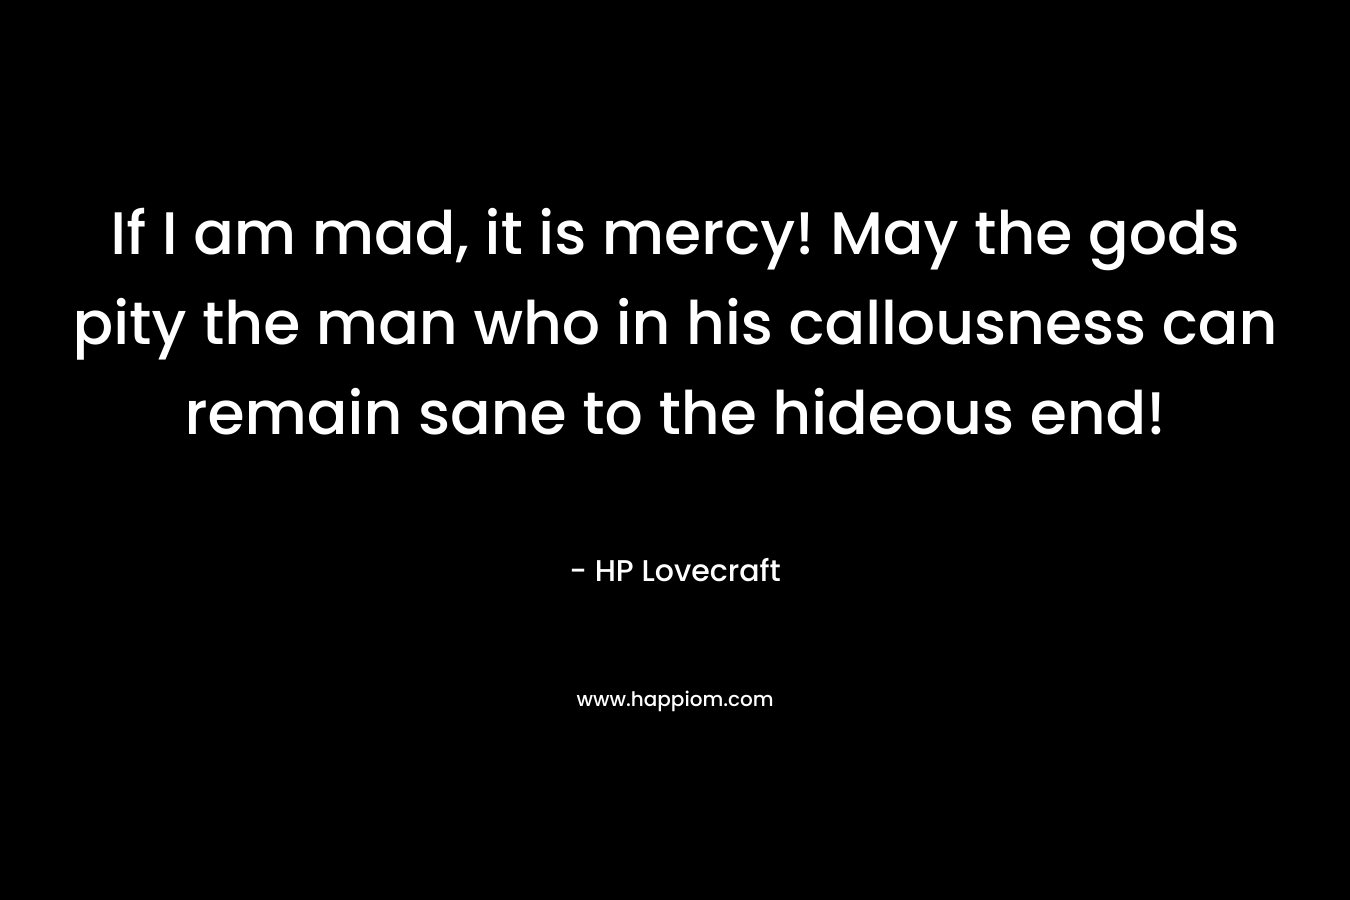 If I am mad, it is mercy! May the gods pity the man who in his callousness can remain sane to the hideous end! – HP Lovecraft